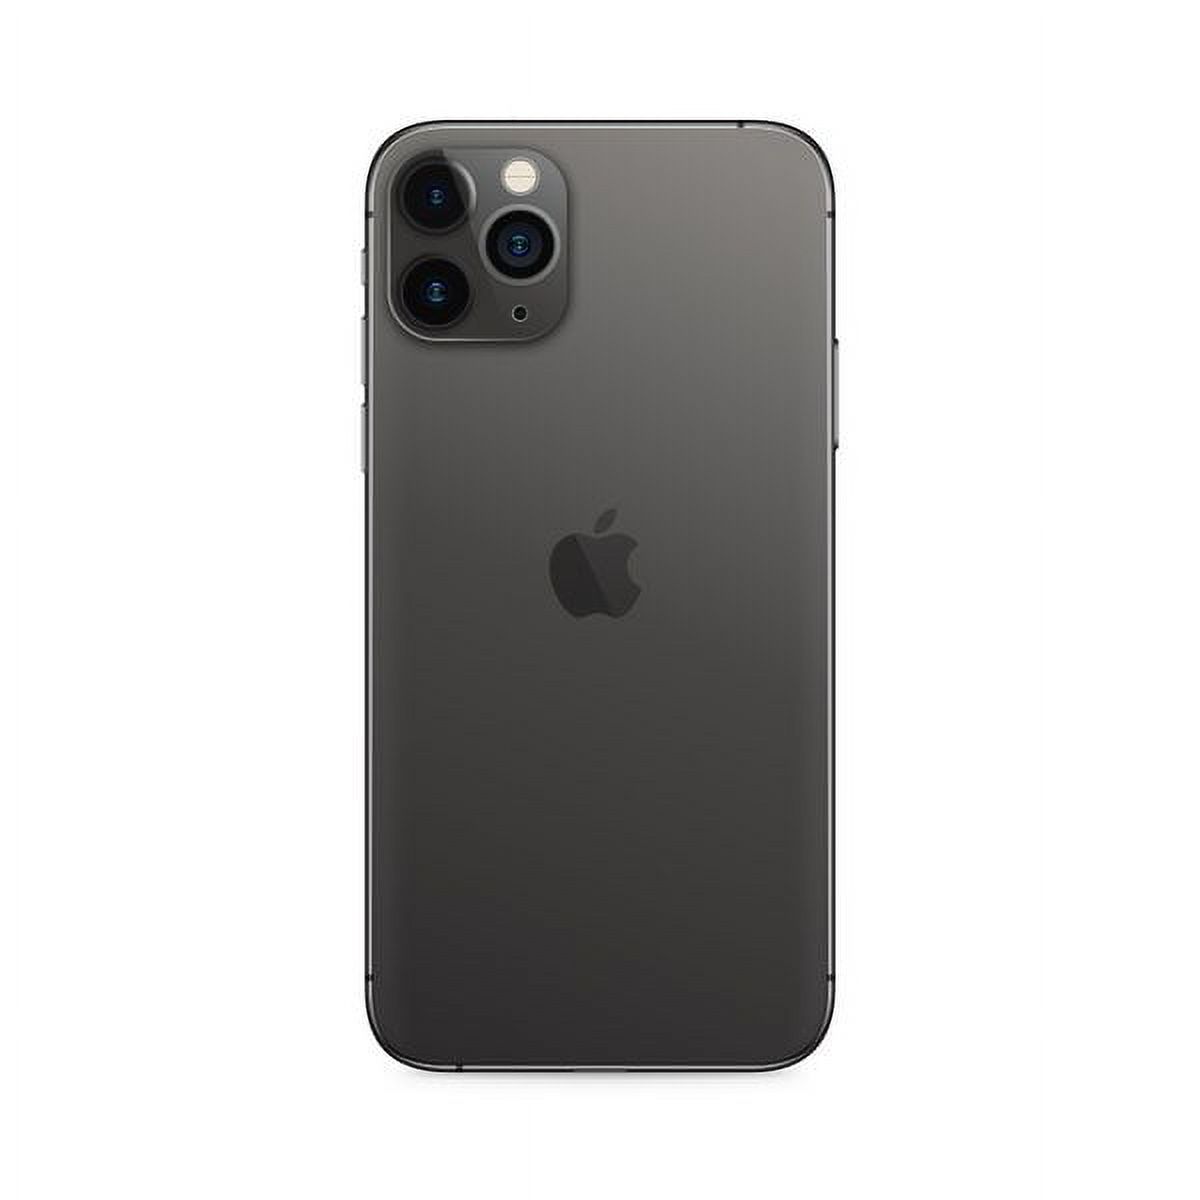 Apple iPhone 11 Pro 64GB Space Gray LTE Cellular Straight Talk/TracFone MWCH2LL/A - TF - image 4 of 4